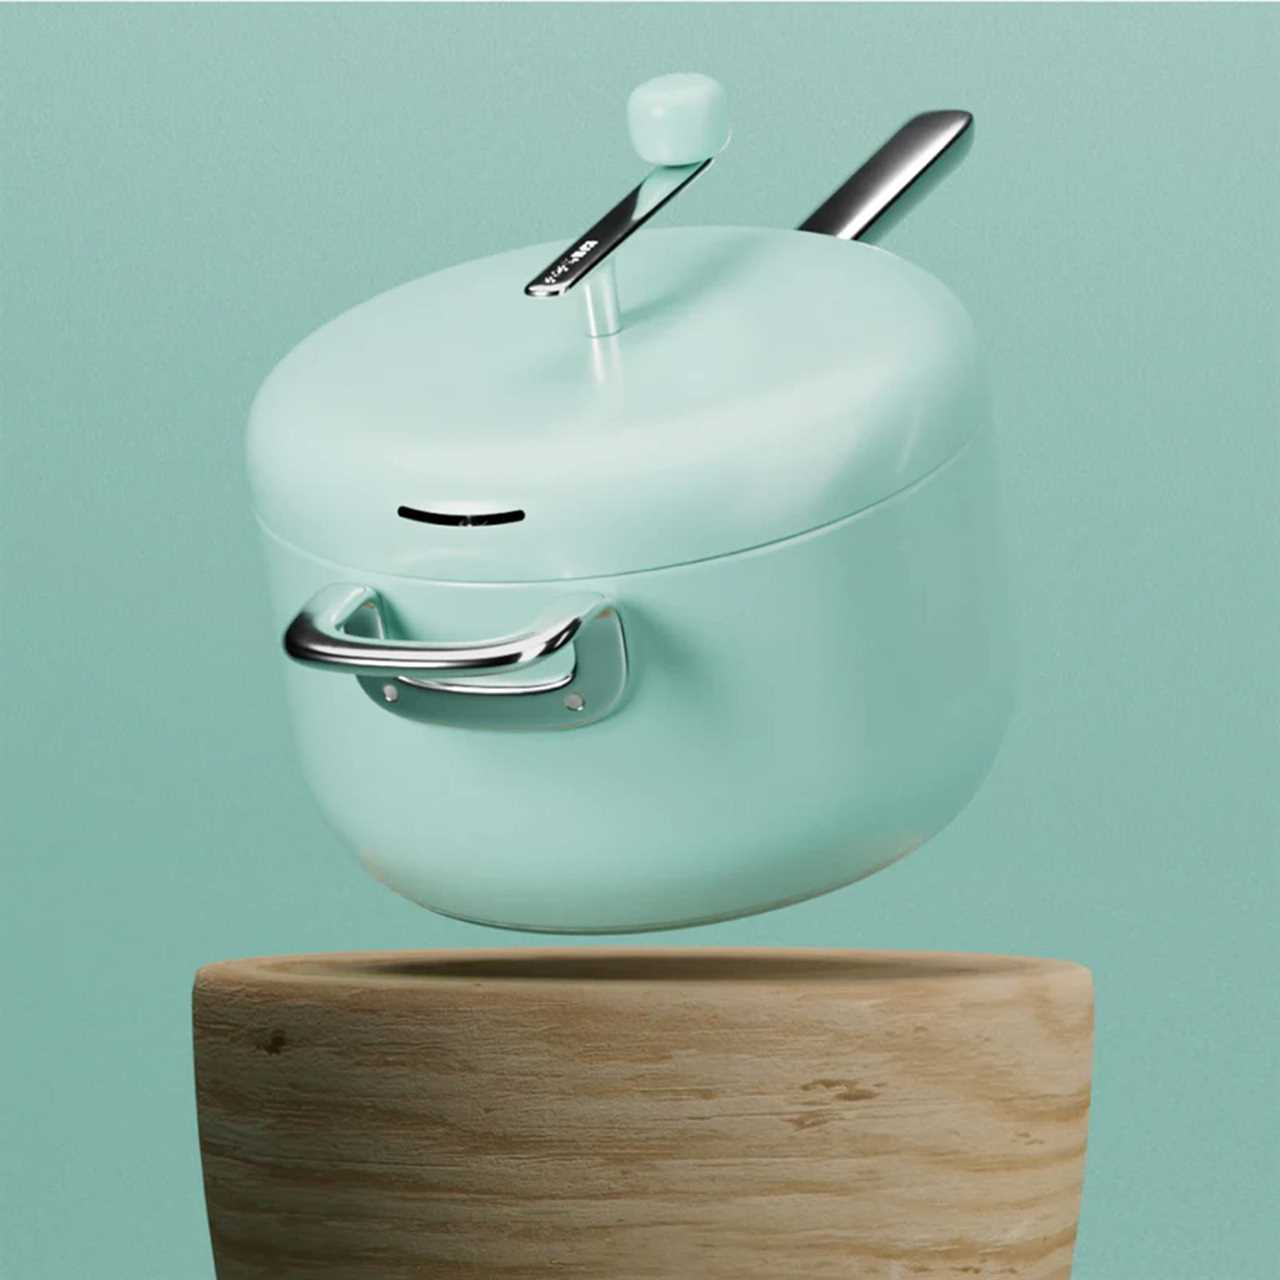 When Did Cookware Get So...Toylike?